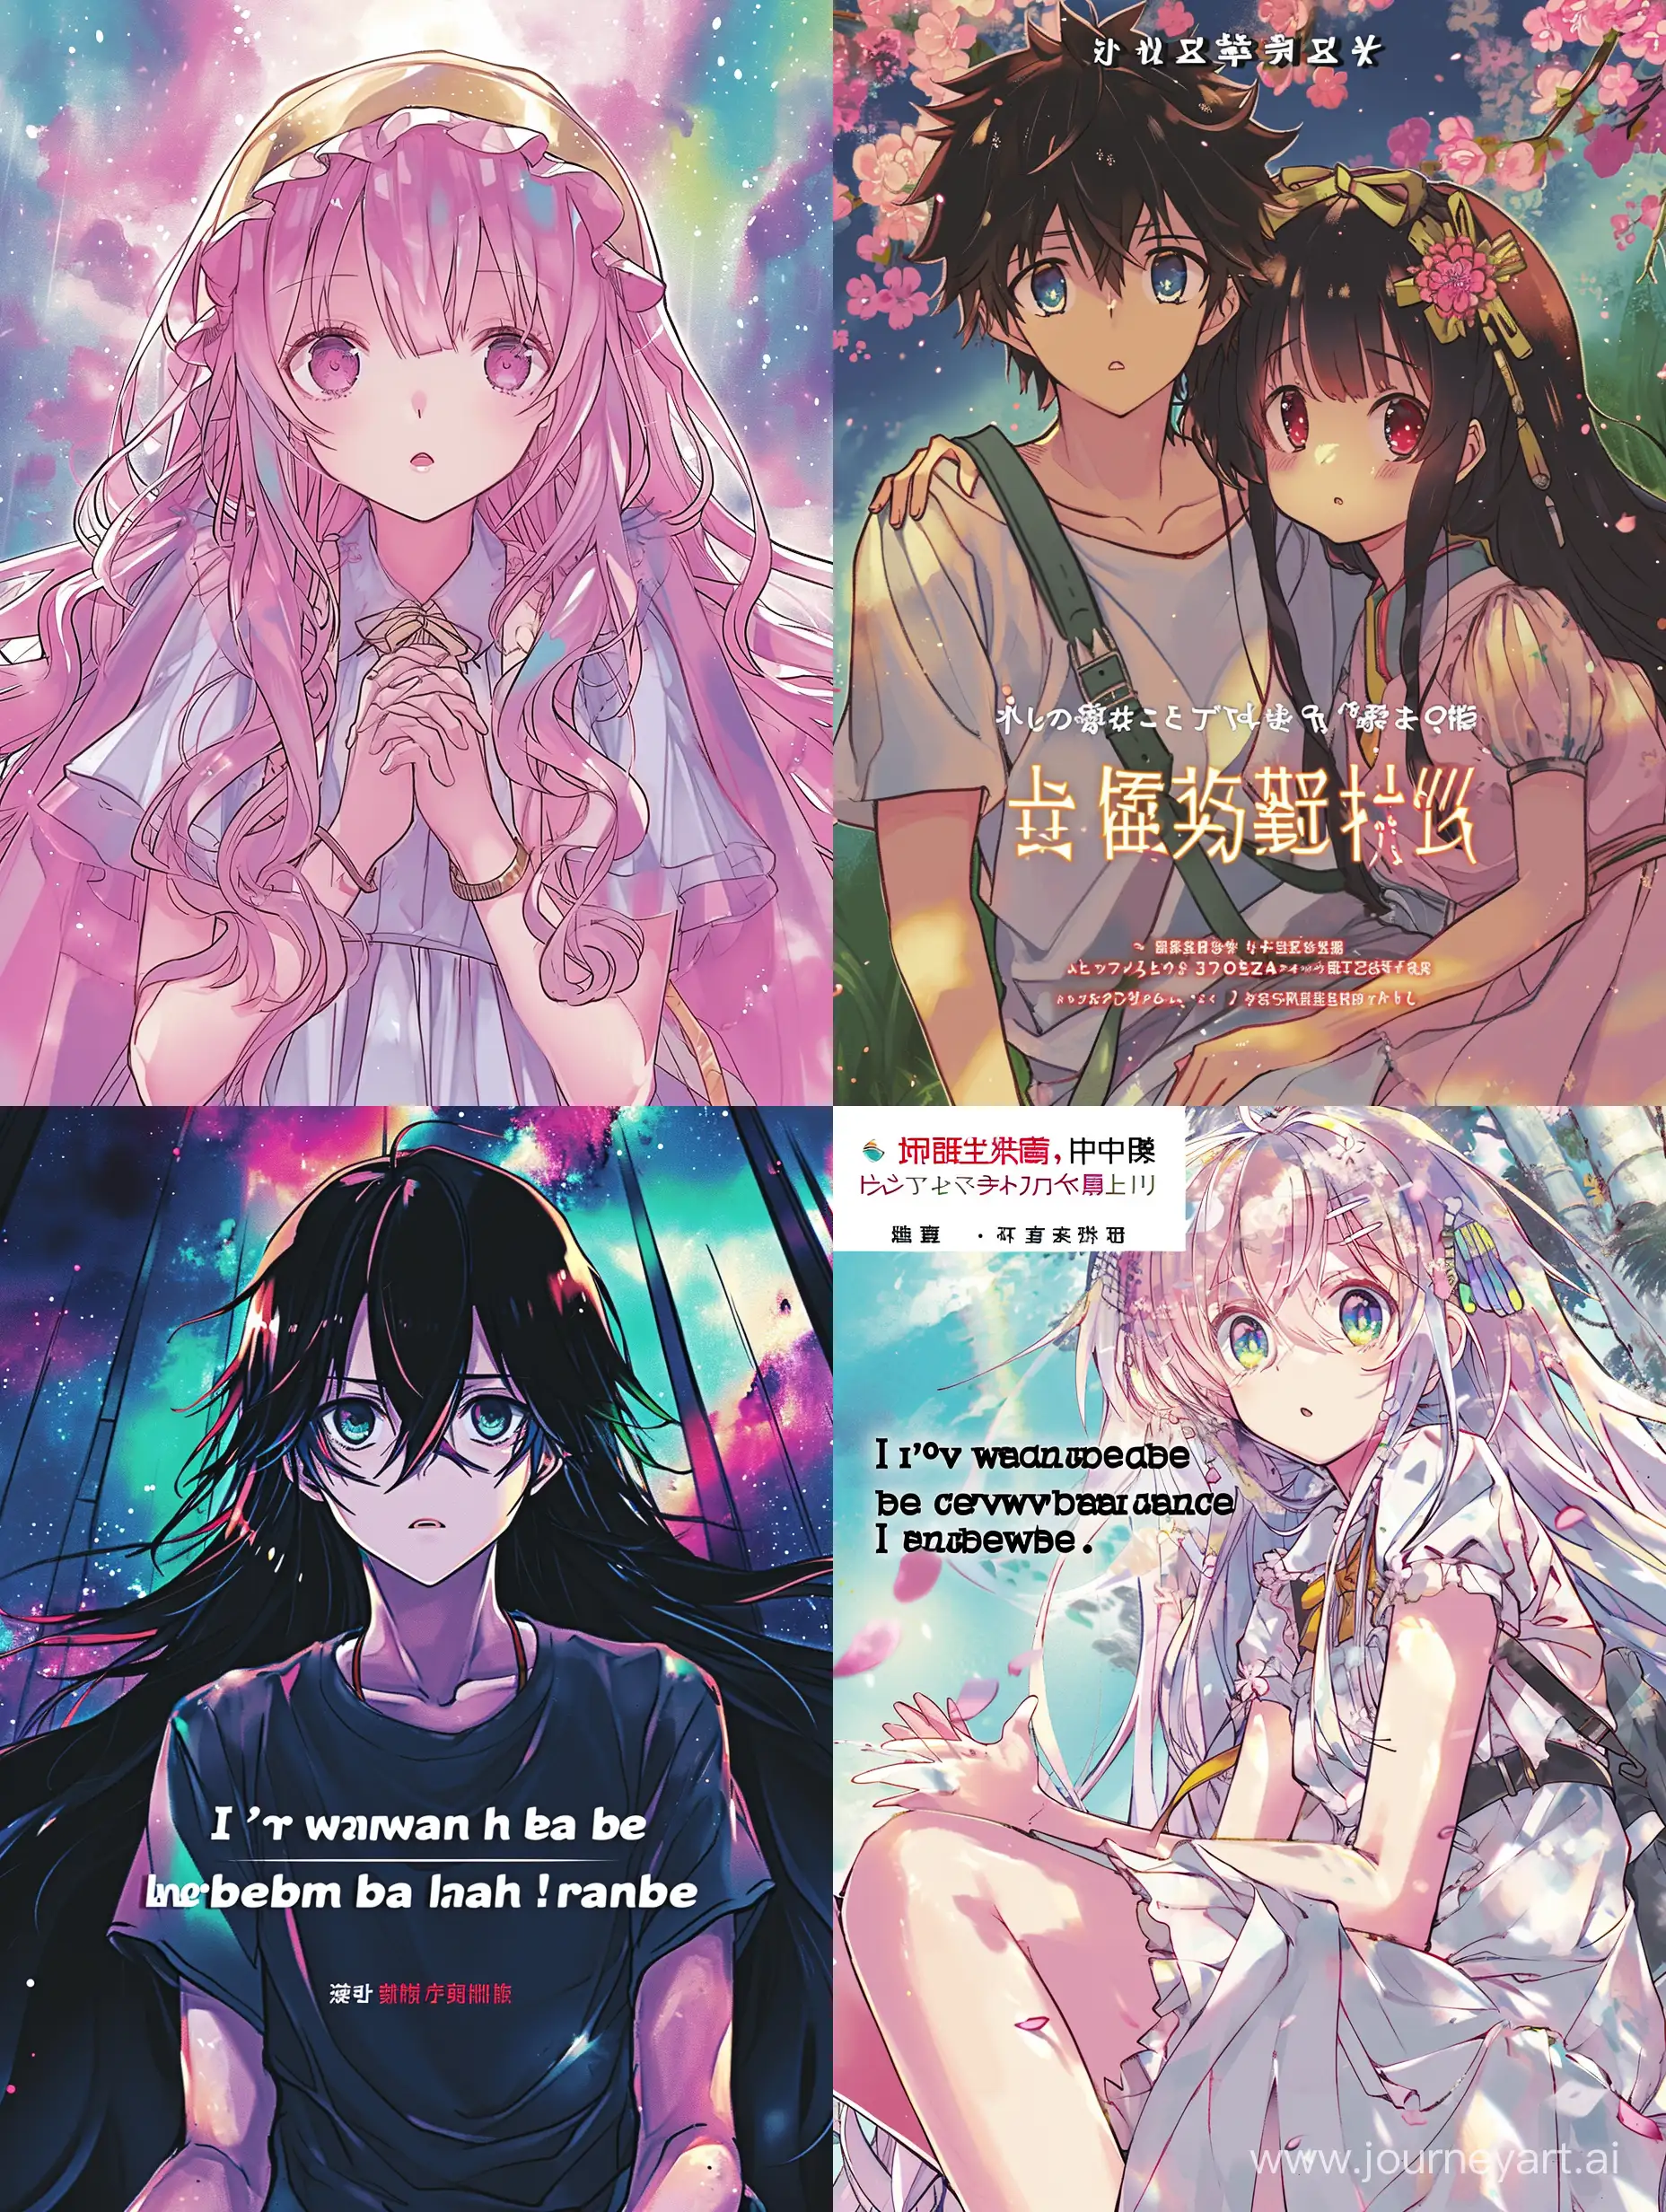 The cover for light novel(ranobe), text "I don't want to be reborn alone", 